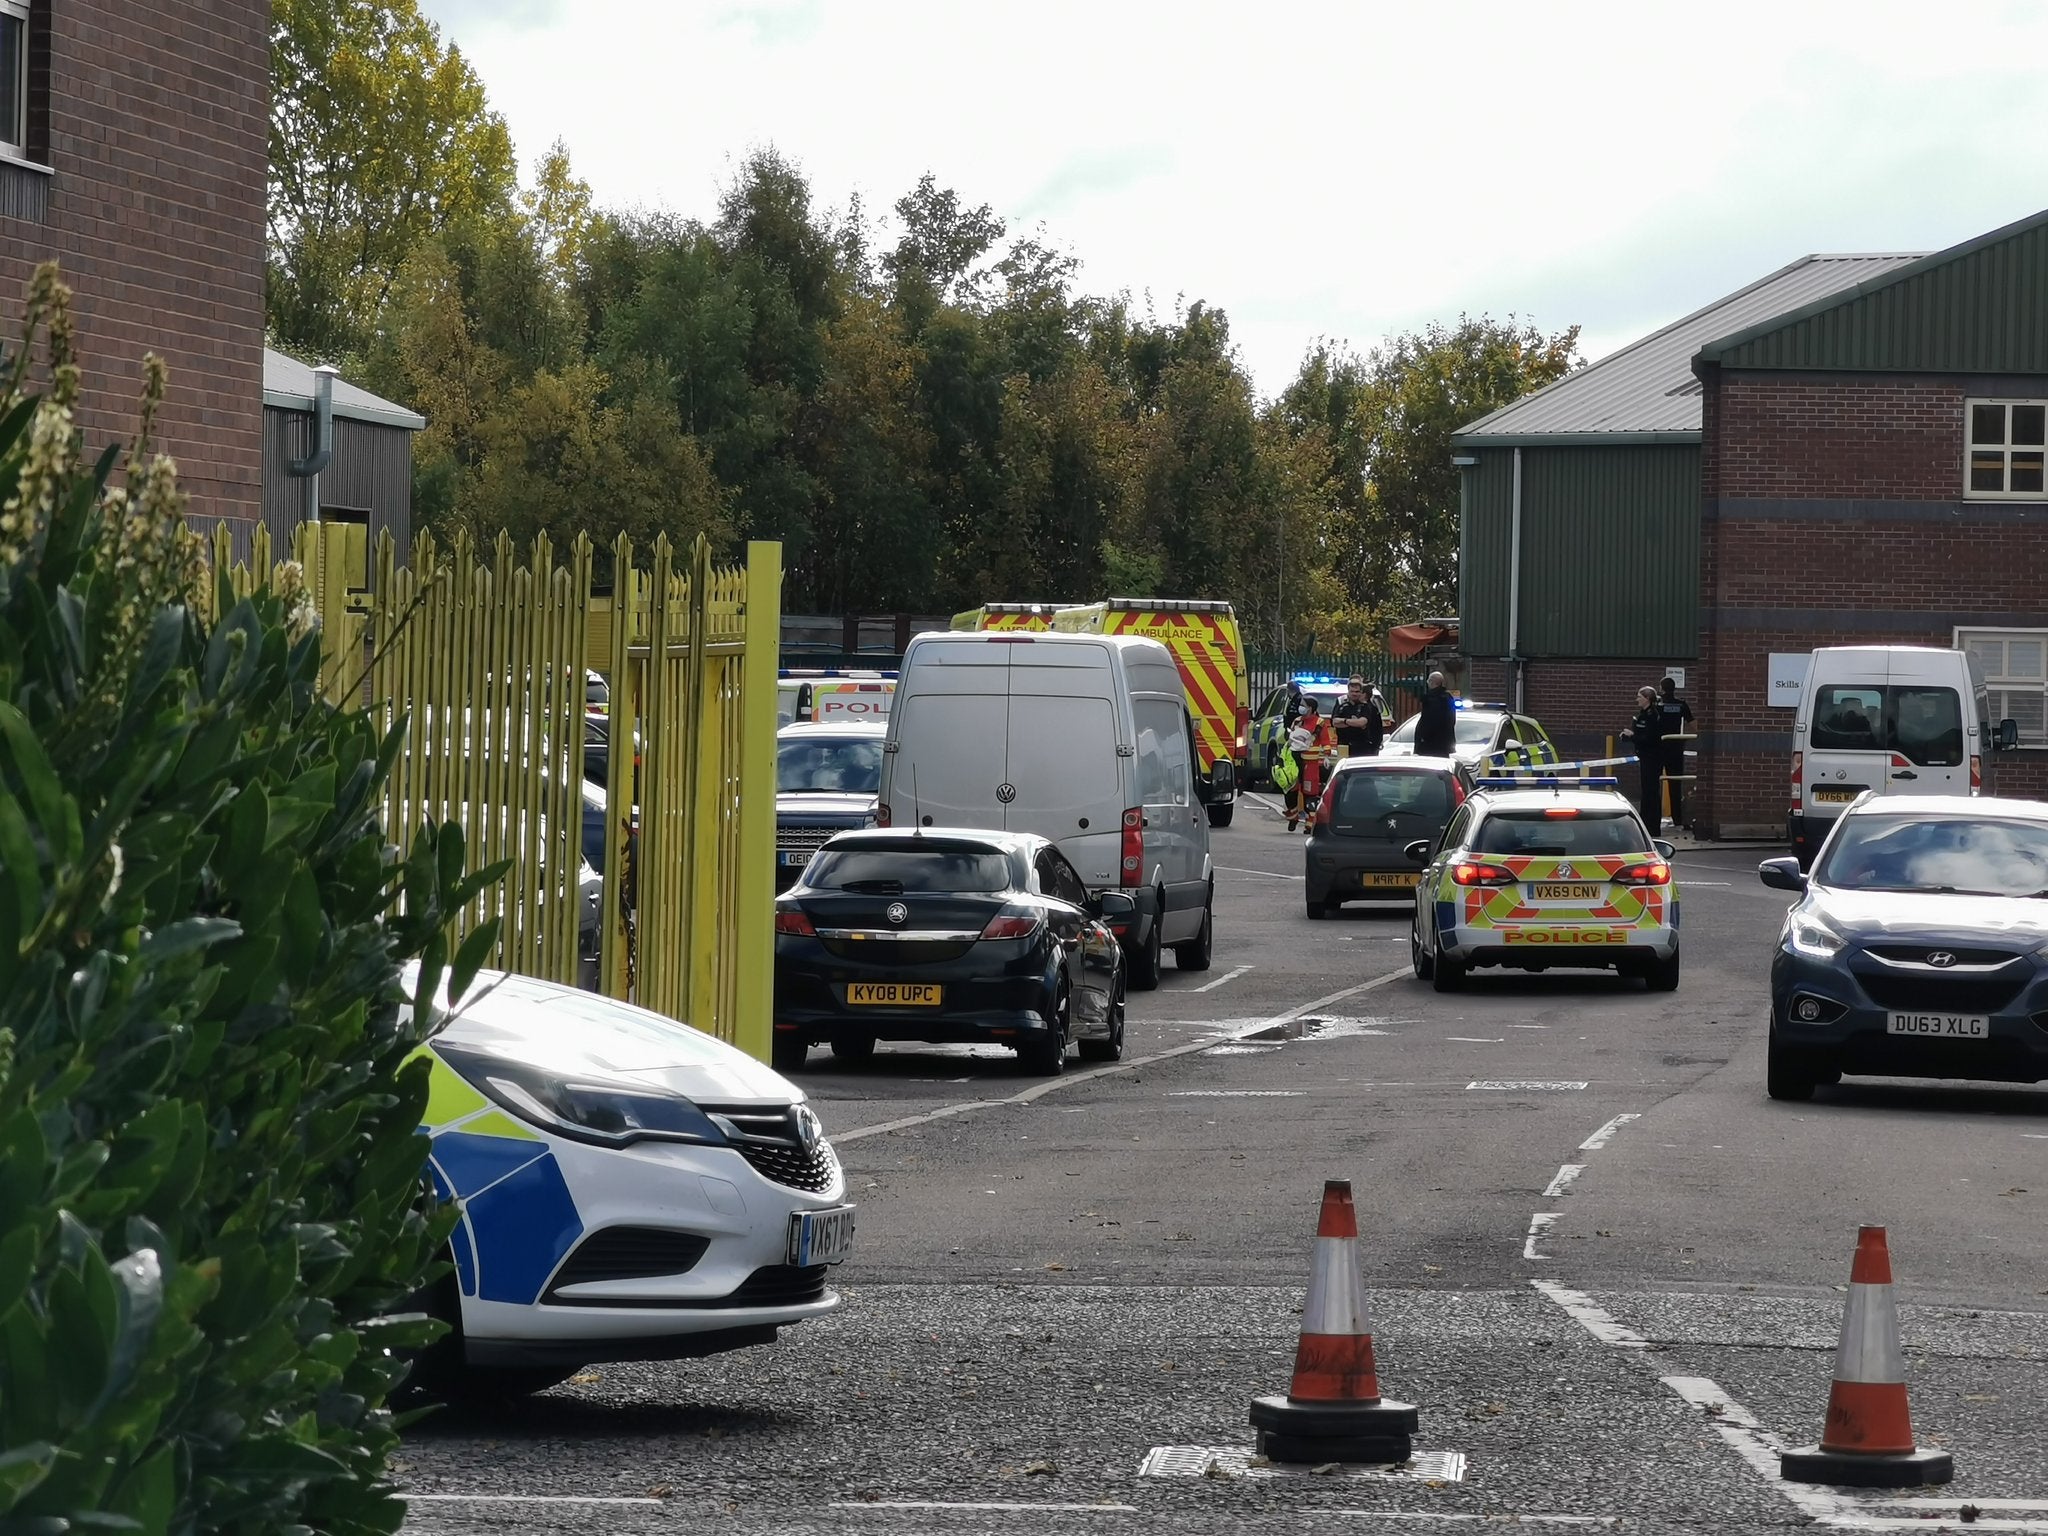 Police response to Bridges Business Park in Horsehay included armed officers